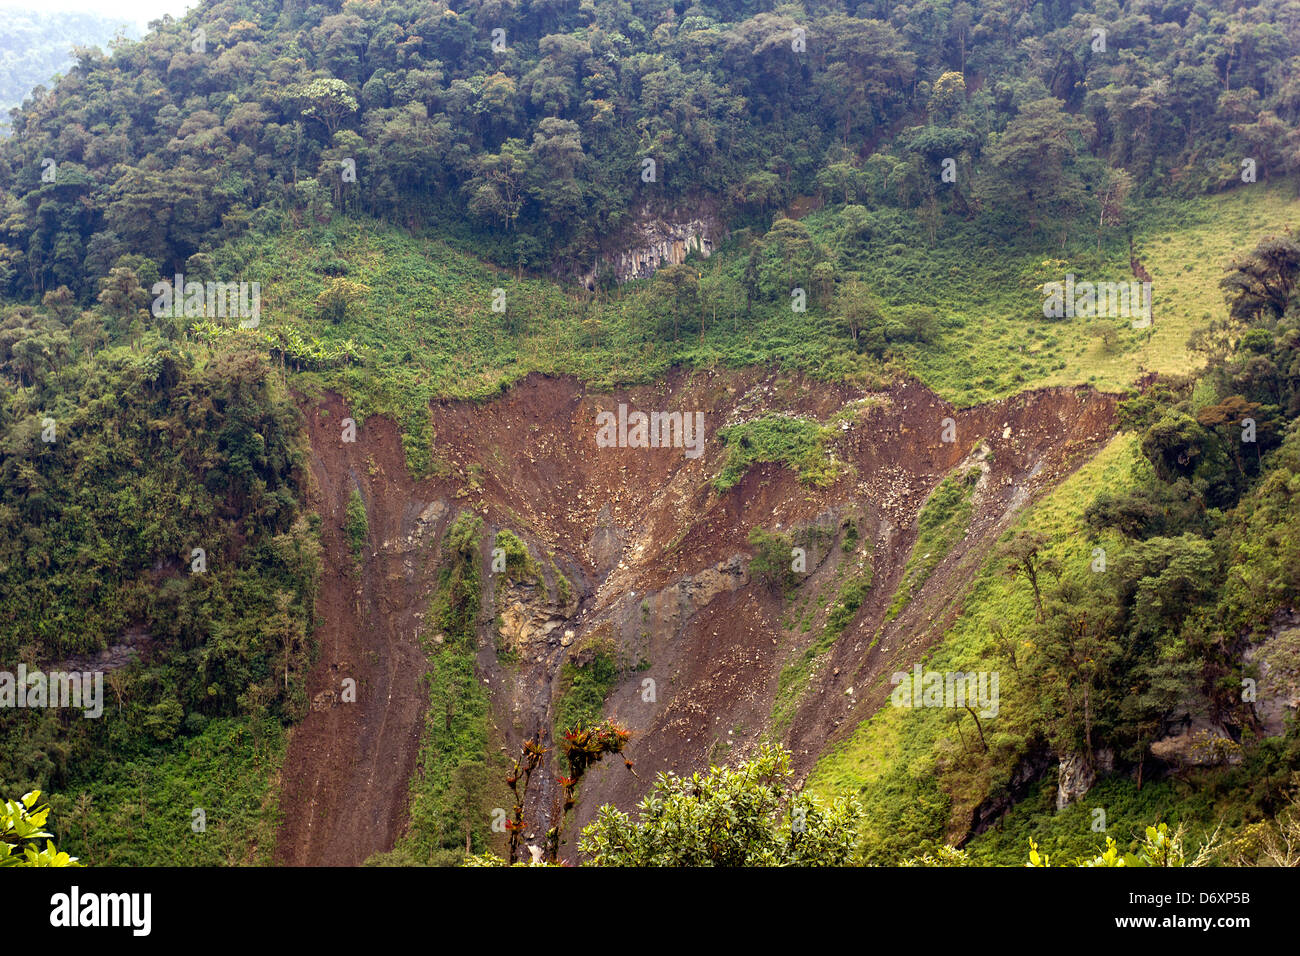 Landslide in the Amazonian foothills of the Andes in Ecuador. Caused by clearing a pasture on as unsuitably steep slope. Stock Photo